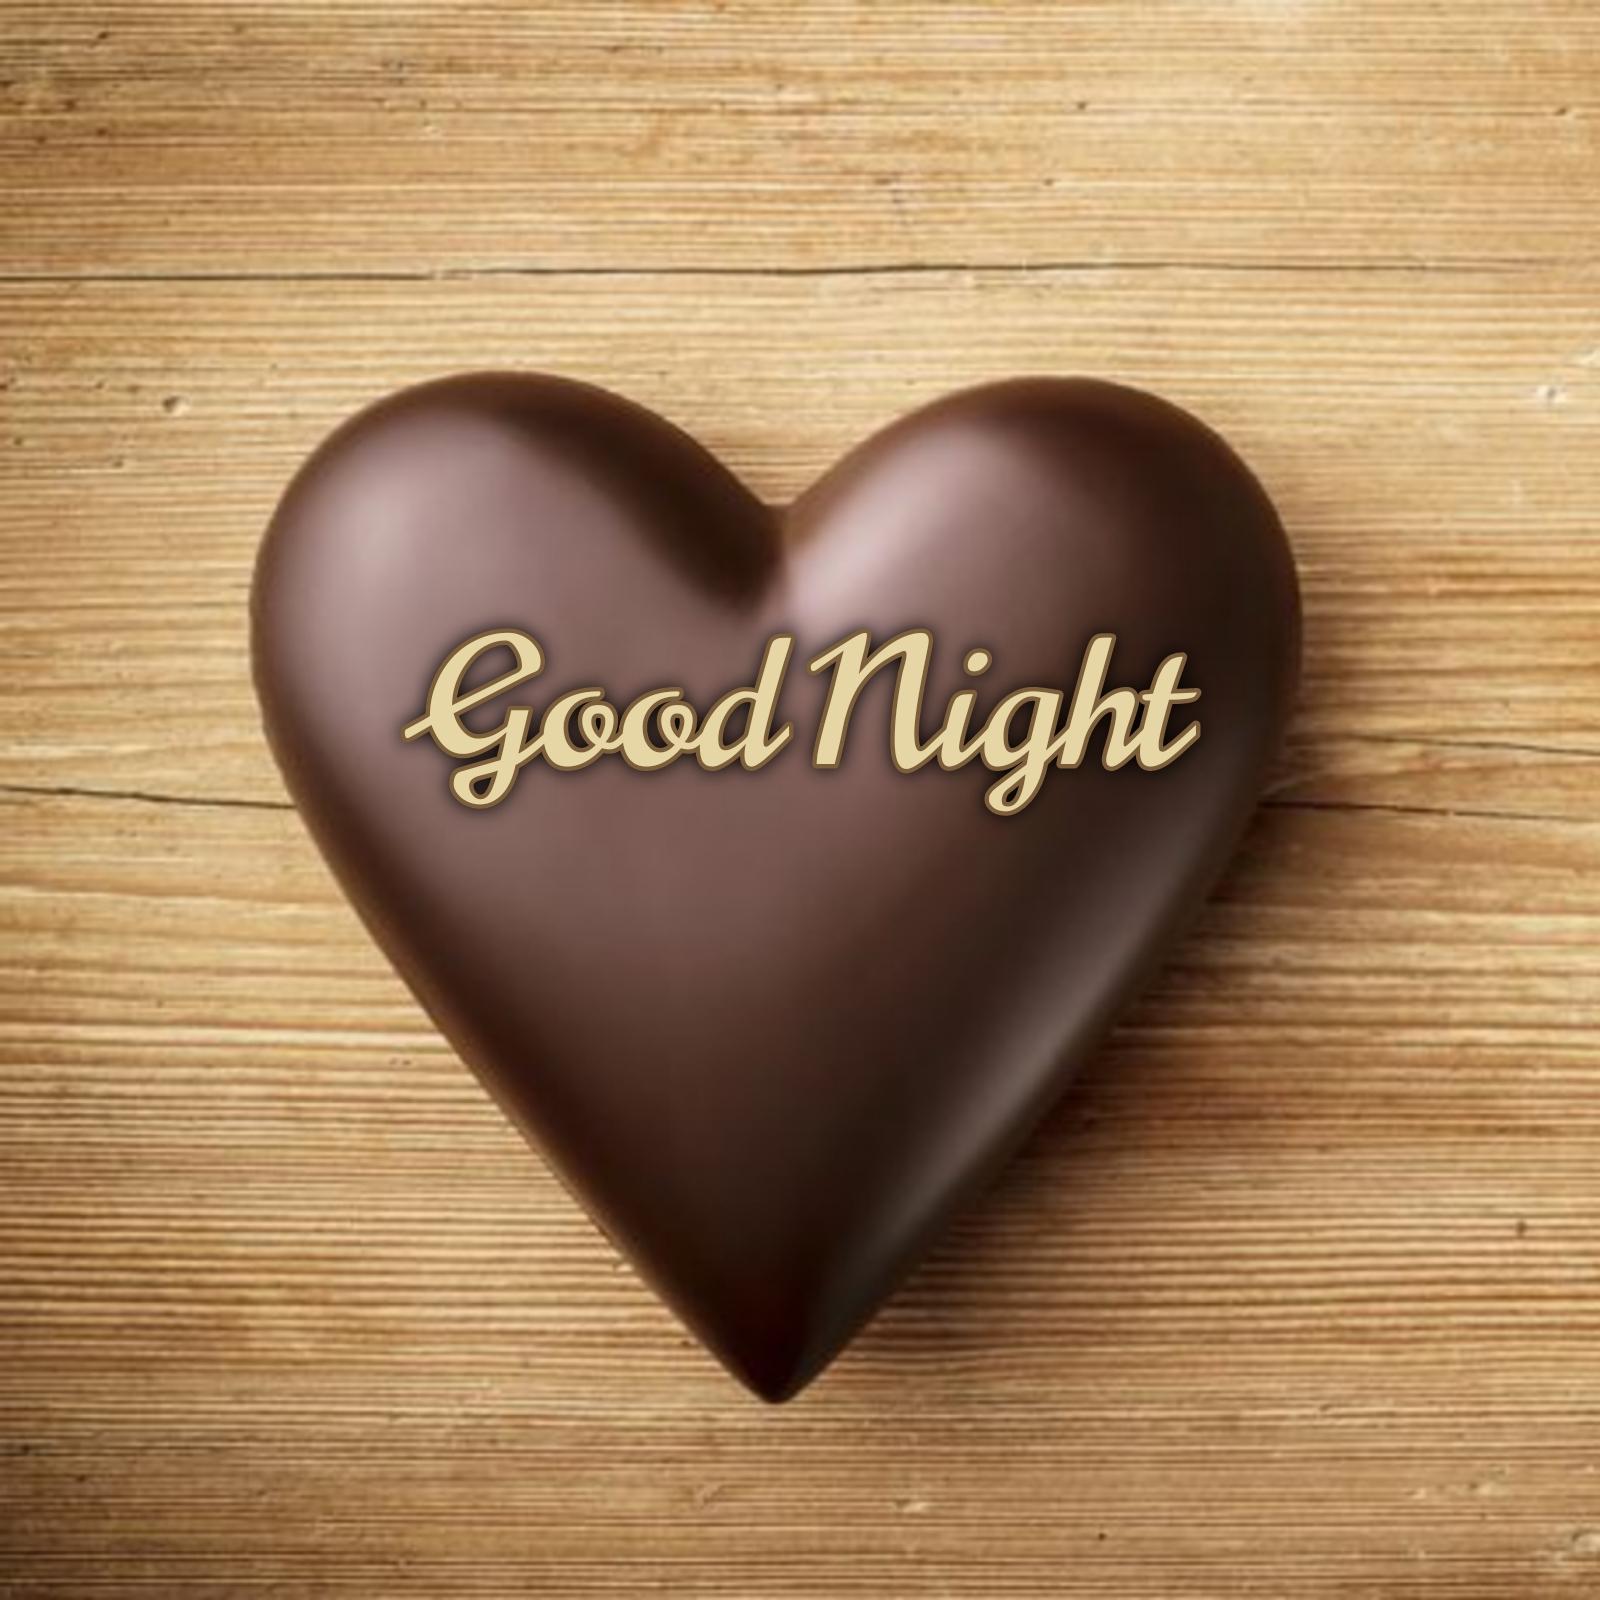 Good Night Images Hd For Lover